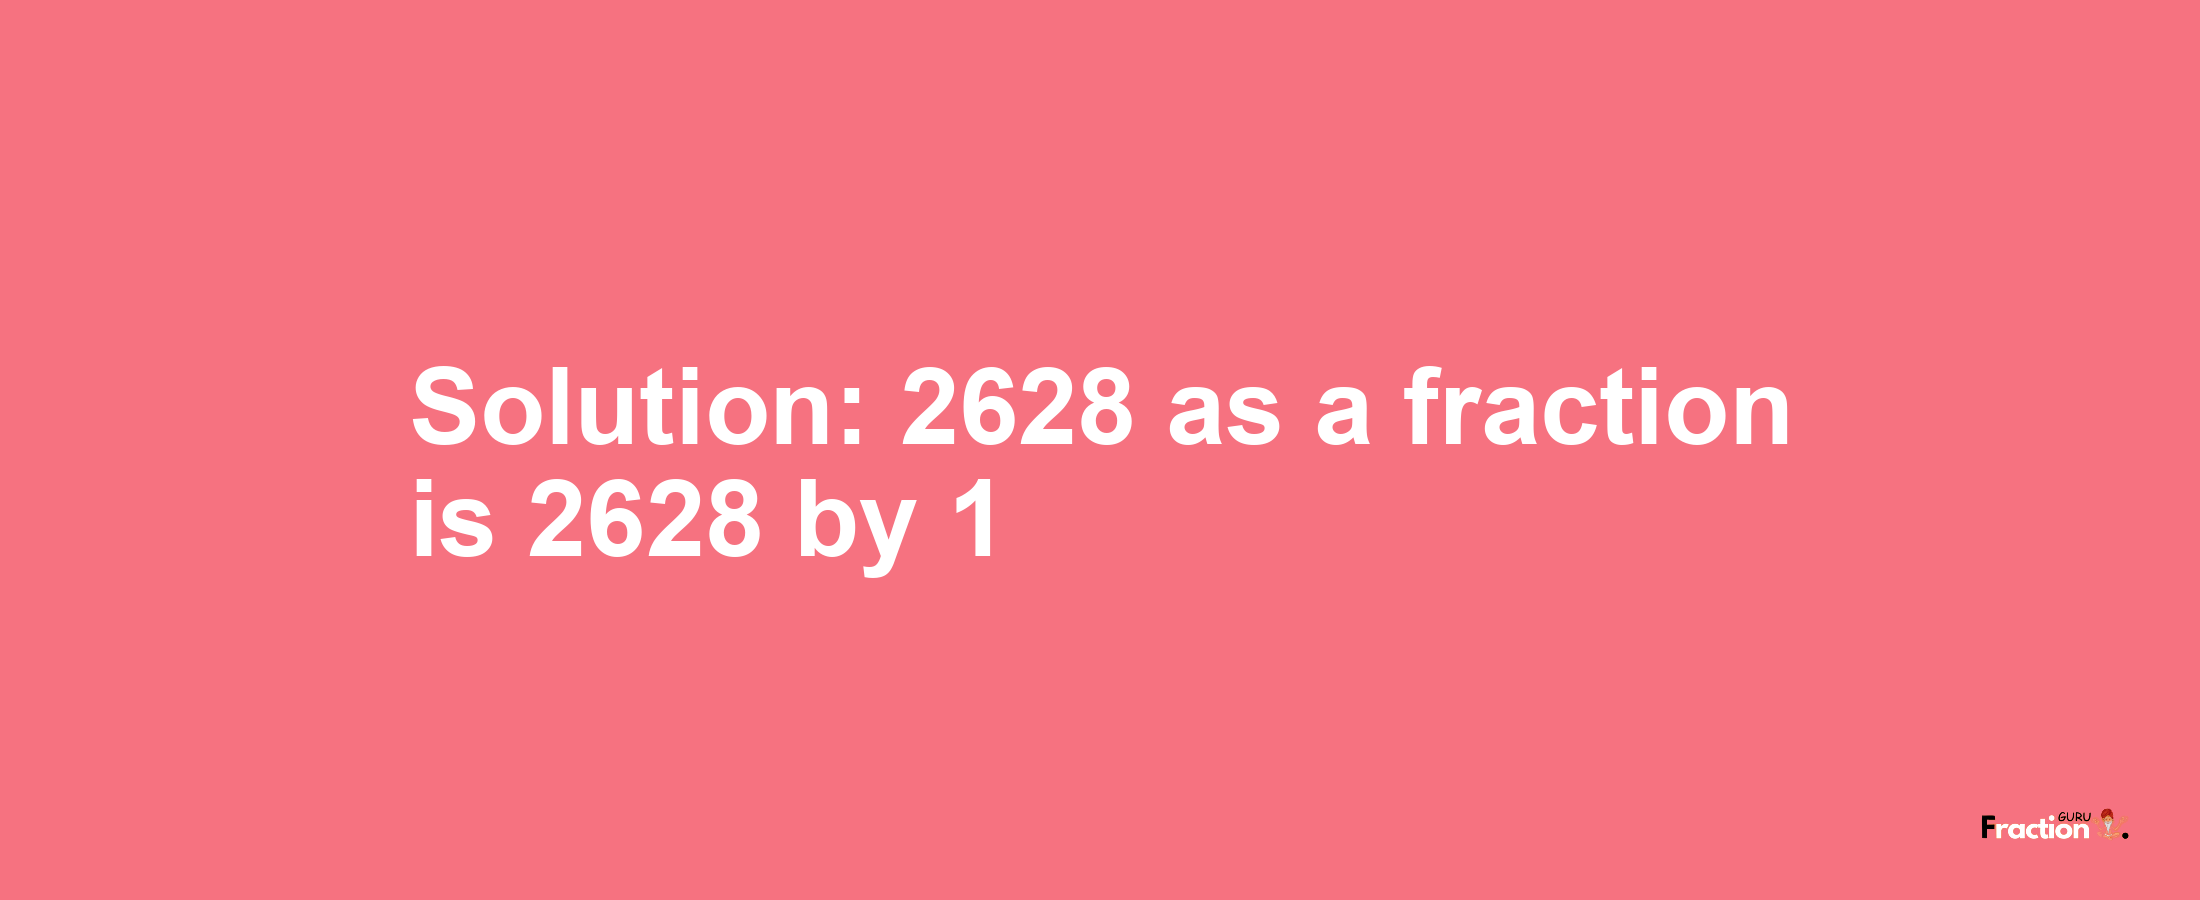 Solution:2628 as a fraction is 2628/1